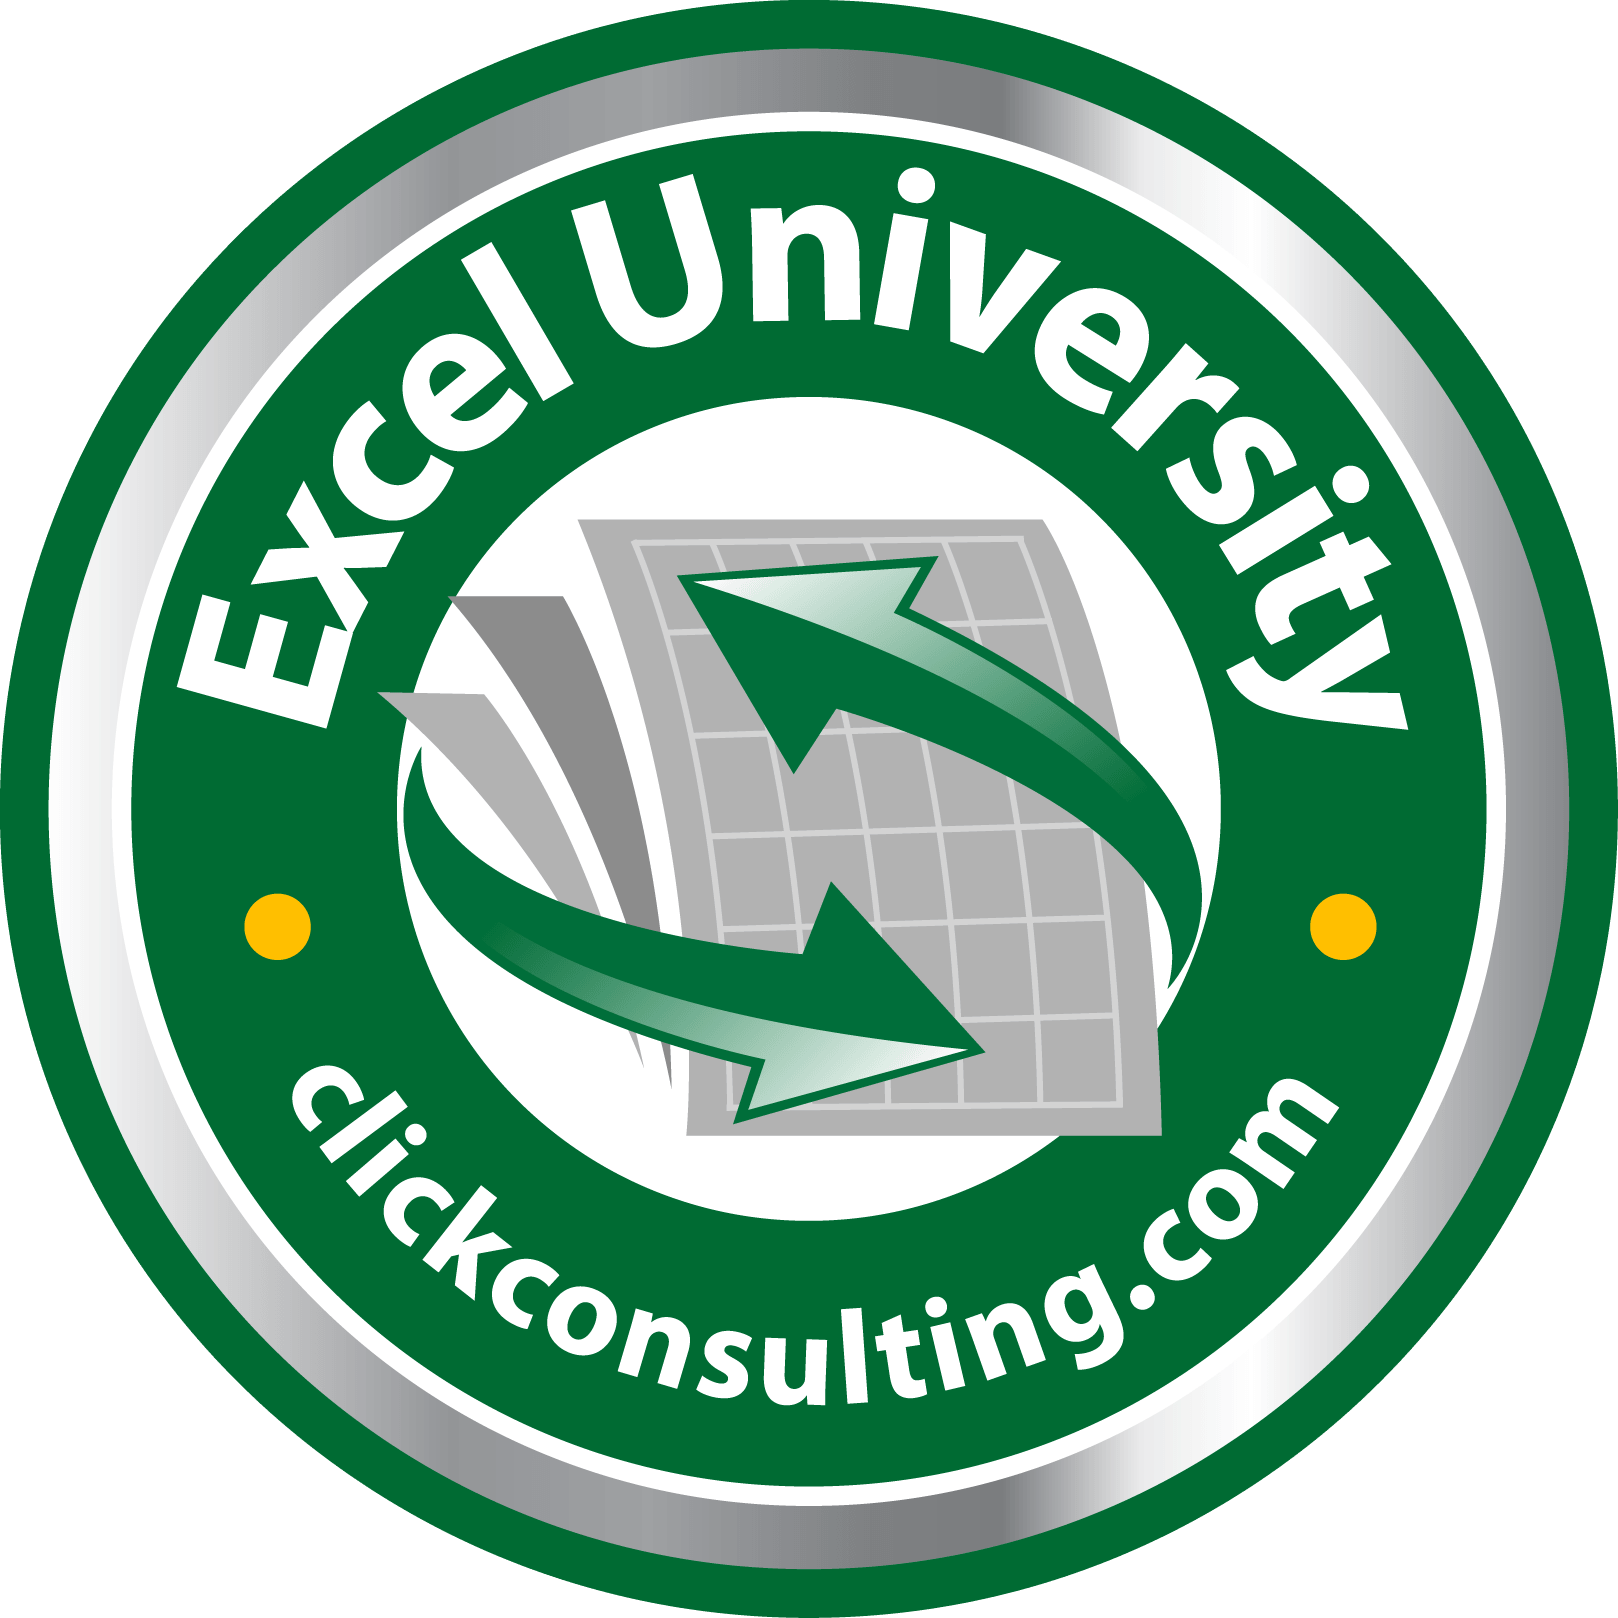 Excel University Interactive Now Available - Excel University - Volume 4 - Featuring Excel 2013 (1618x1618)